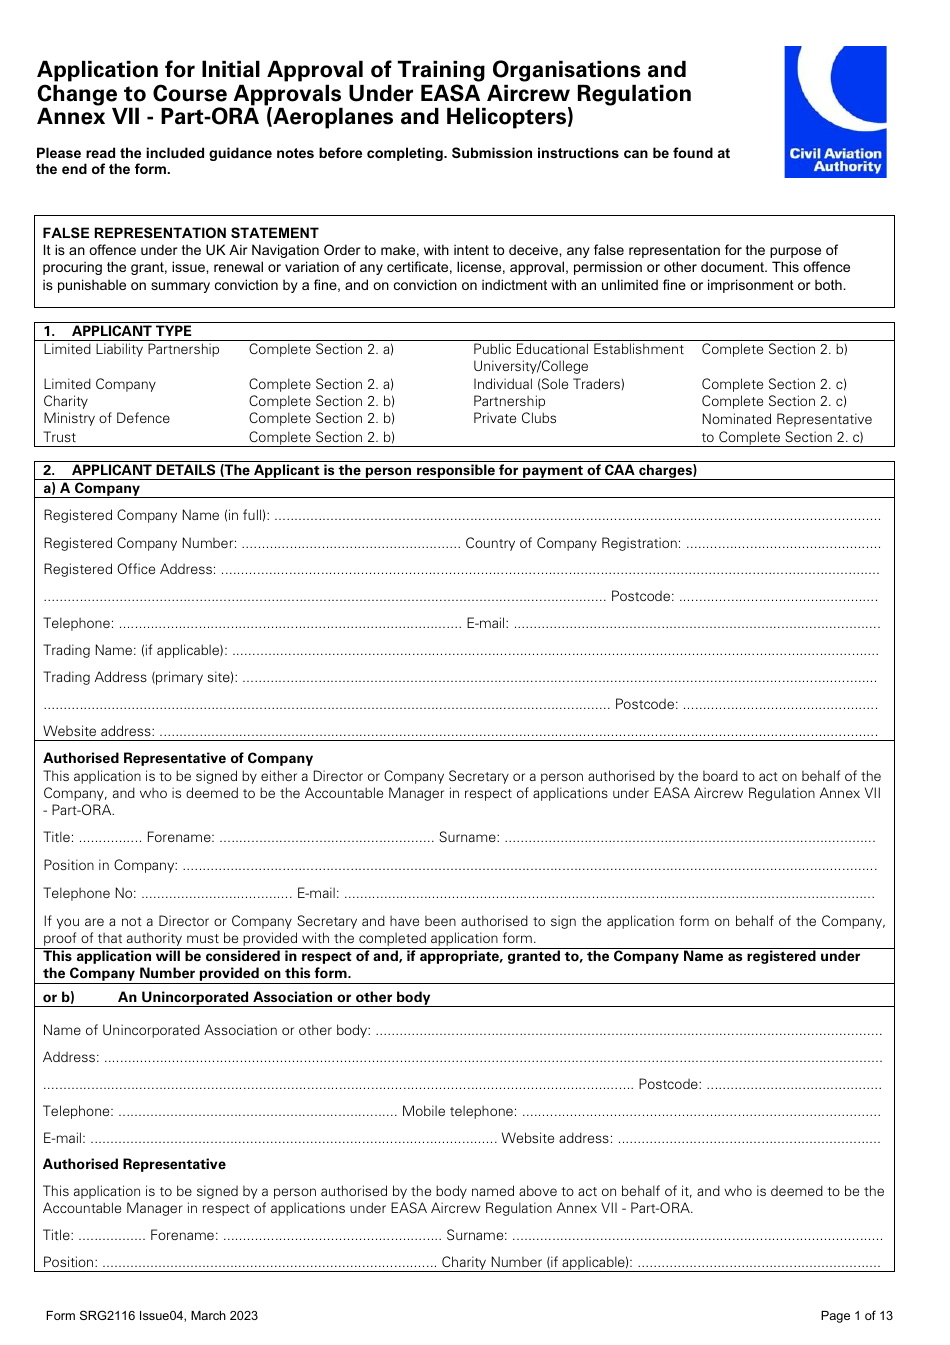 Form SRG2116 Application for Initial Approval of Training Organisations and Change to Course Approvals Under Easa Aircrew Regulation Annex VII - Part-Ora (Aeroplanes and Helicopters) - United Kingdom, Page 1